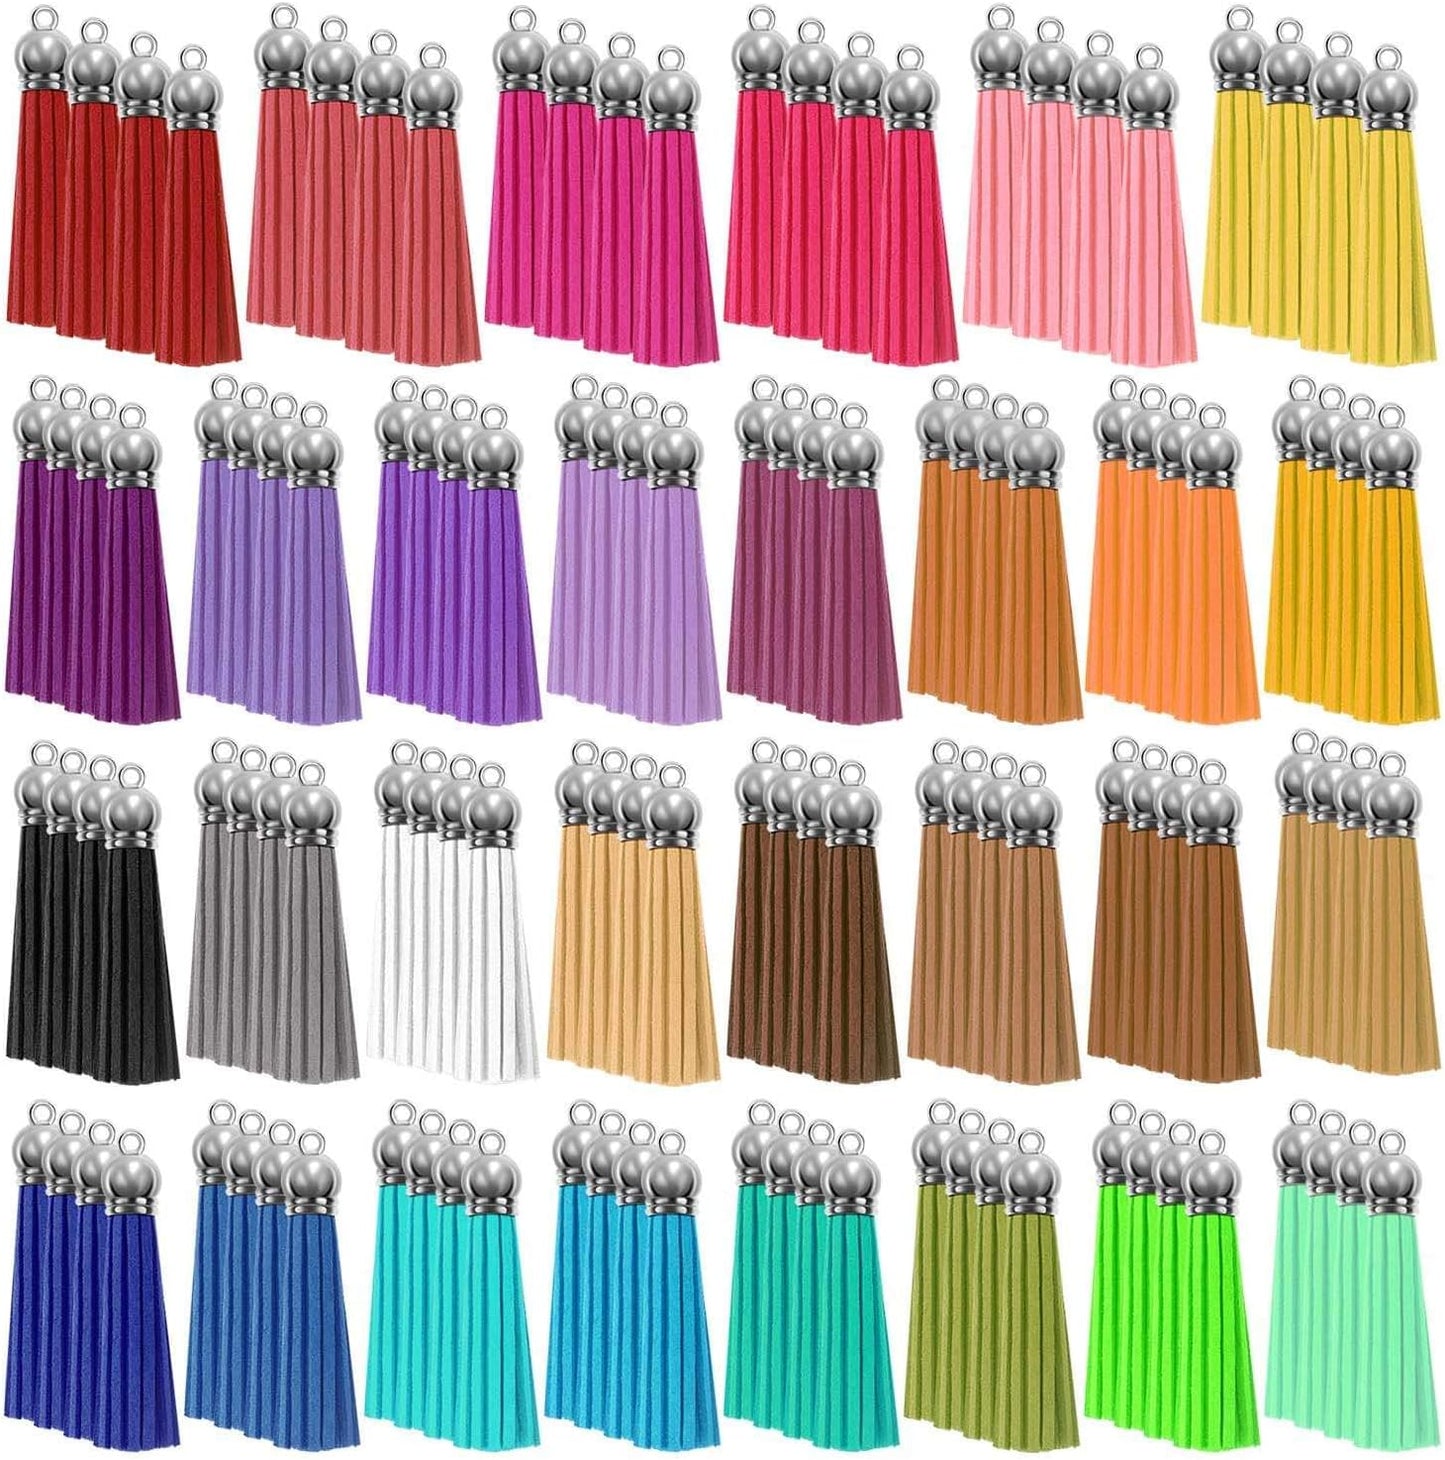 Tassels,  240Pcs Keychain Tassels Bulk for Jewelry Making and Crafts, Keychain Making Charms Supplies for Acrylic Blank Keychains, Bracelets and Jewelry Making